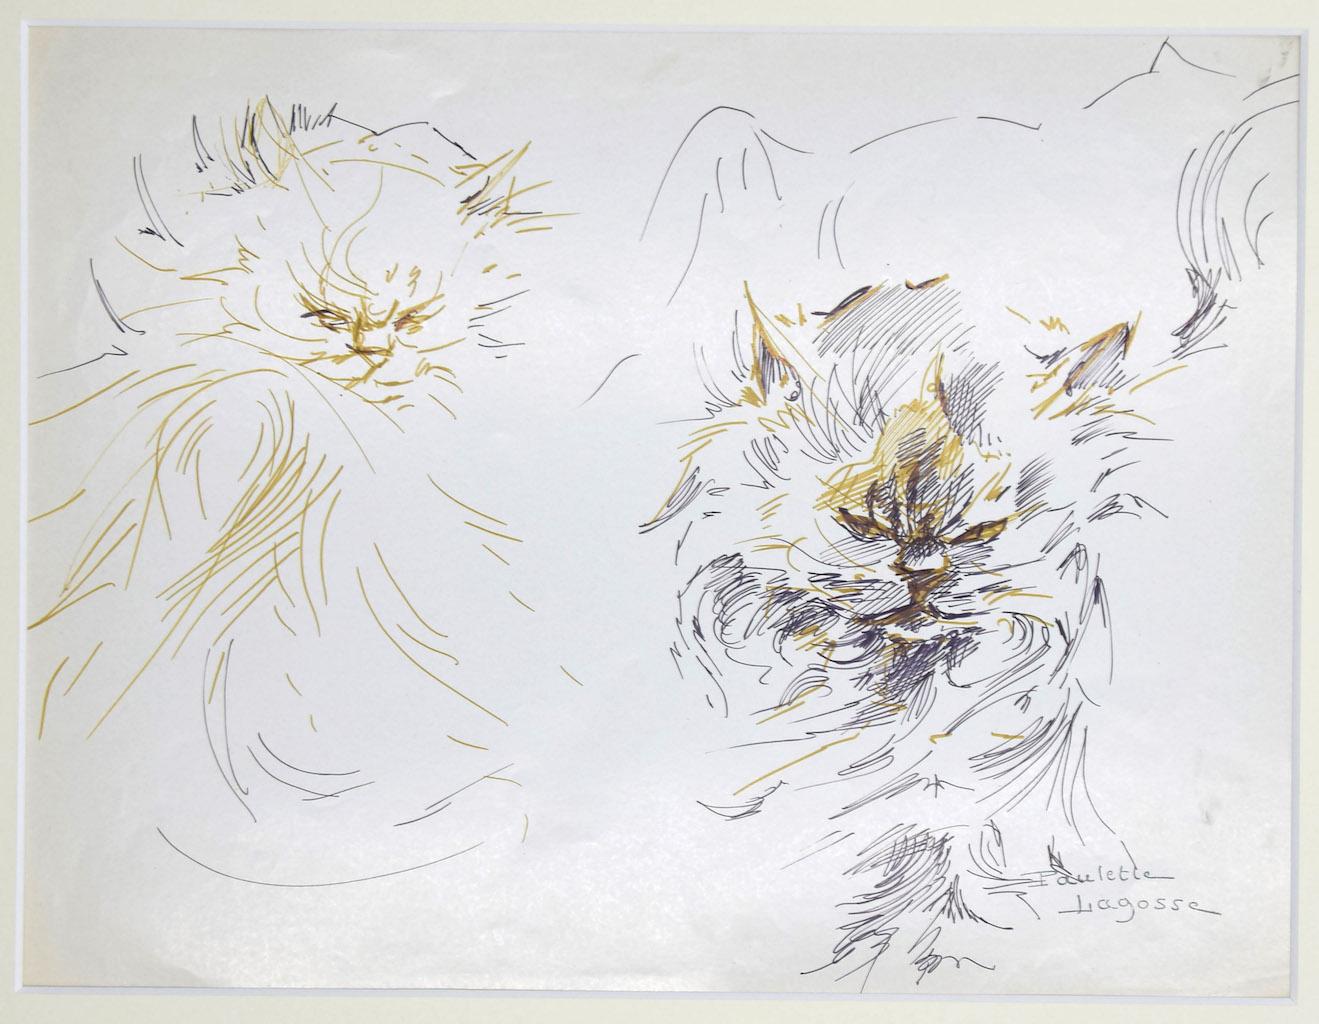 The Cats - Pen on Paper by M. P. Lagosse - 1970s